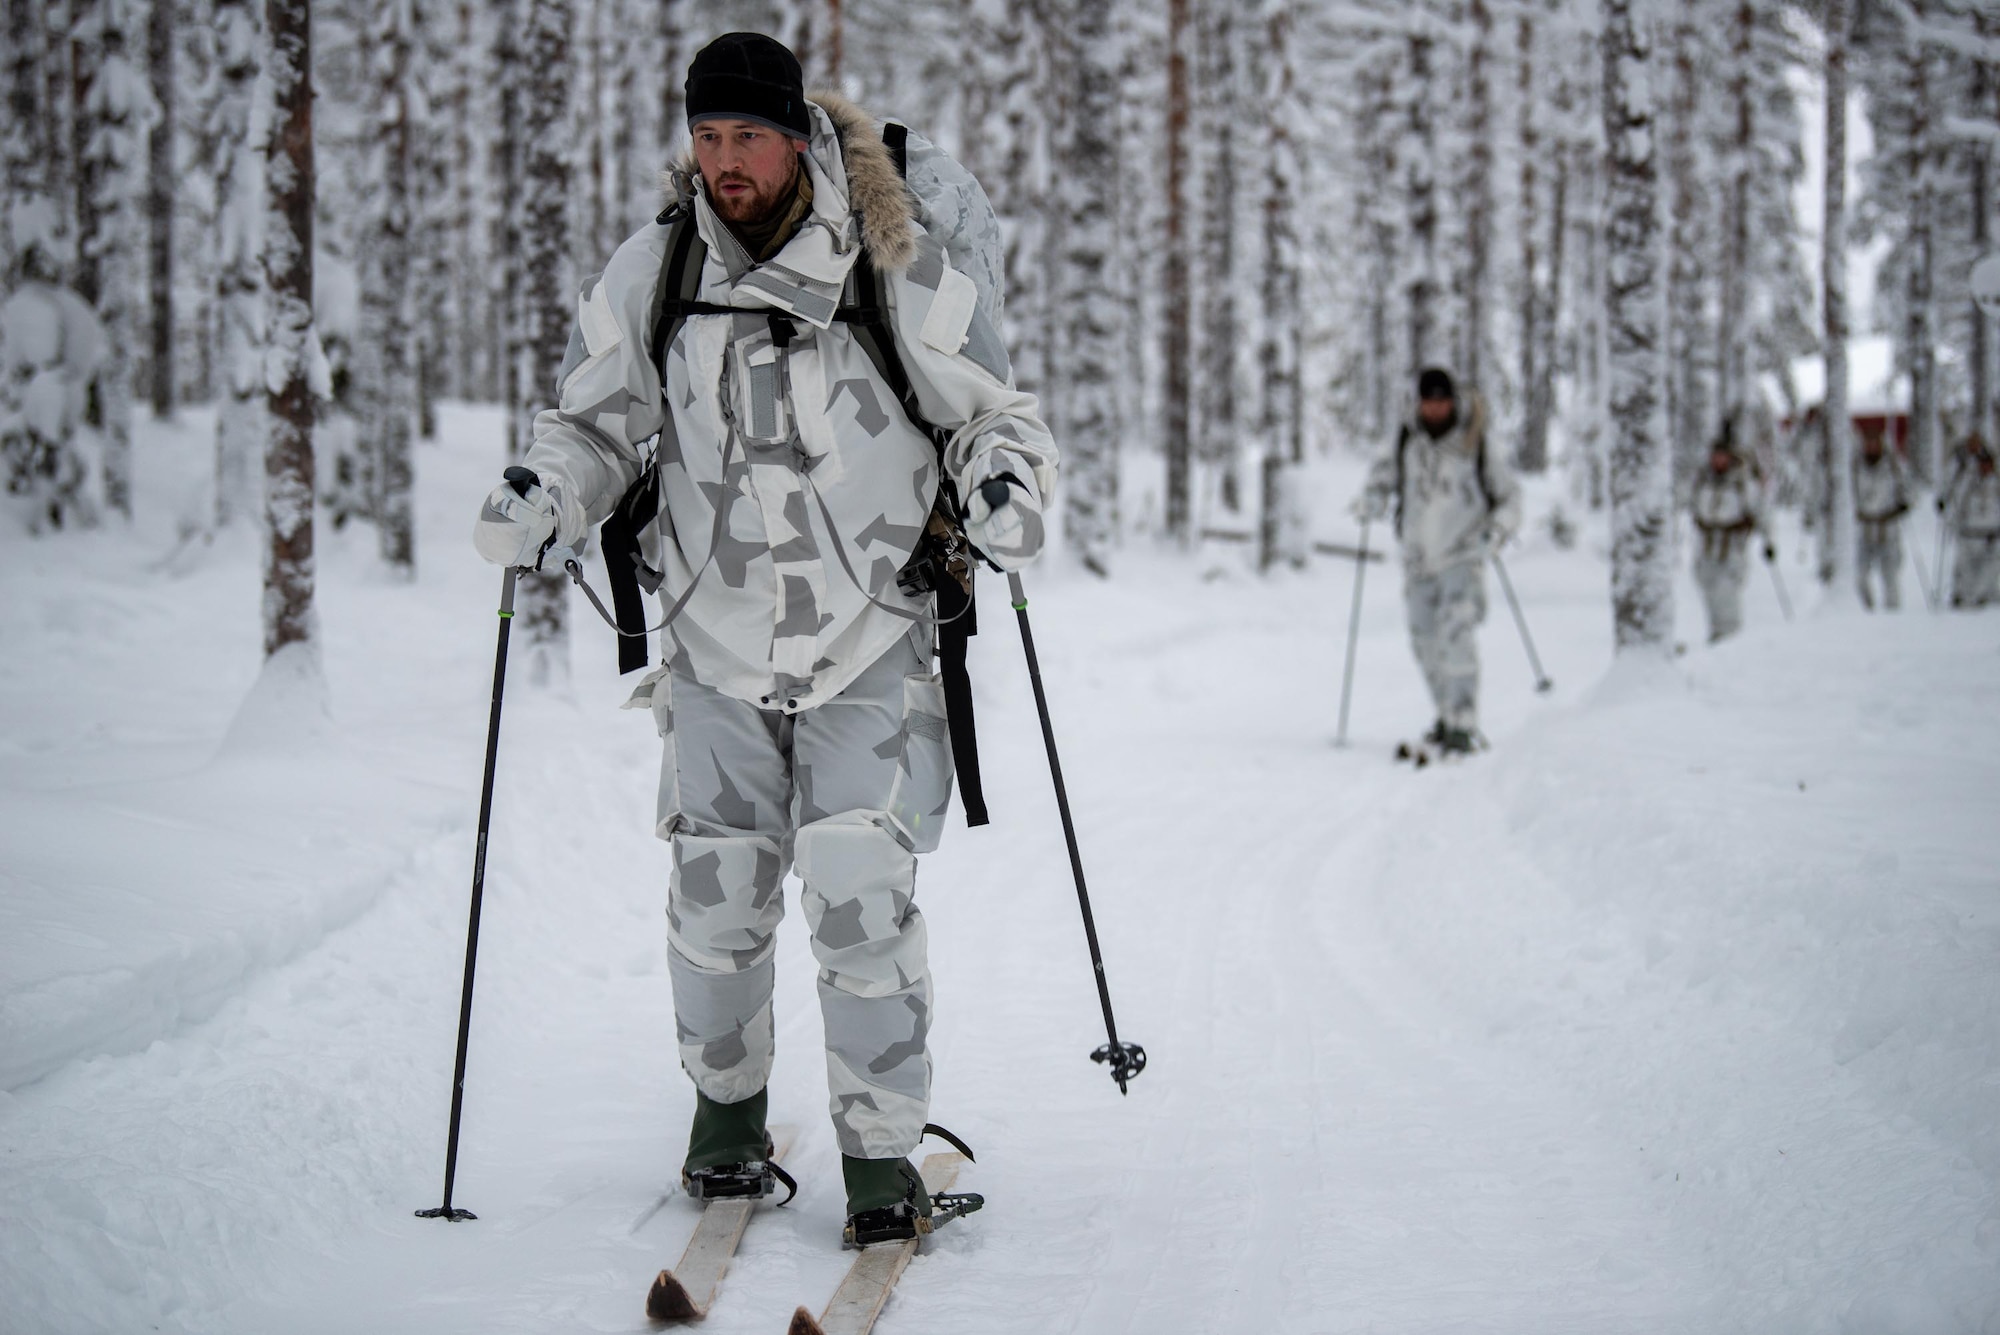 Staff Sgt. Cole Kyser, a pararescueman with the Kentucky Air National Guard’s 123rd Special Tactics Squadron, trains on cross-country skiing basics in Grubbnäsudden, Sweden, Jan. 10, 2022. Fifteen members from the 123rd STS — including combat controllers; pararescuemen; special reconnaissance personnel; search, evasion, resistance and escape troops; and support Airmen — came here to build upon their relationship with European partners during an arctic warfare training course. (U.S. Air National Guard photo by Phil Speck)